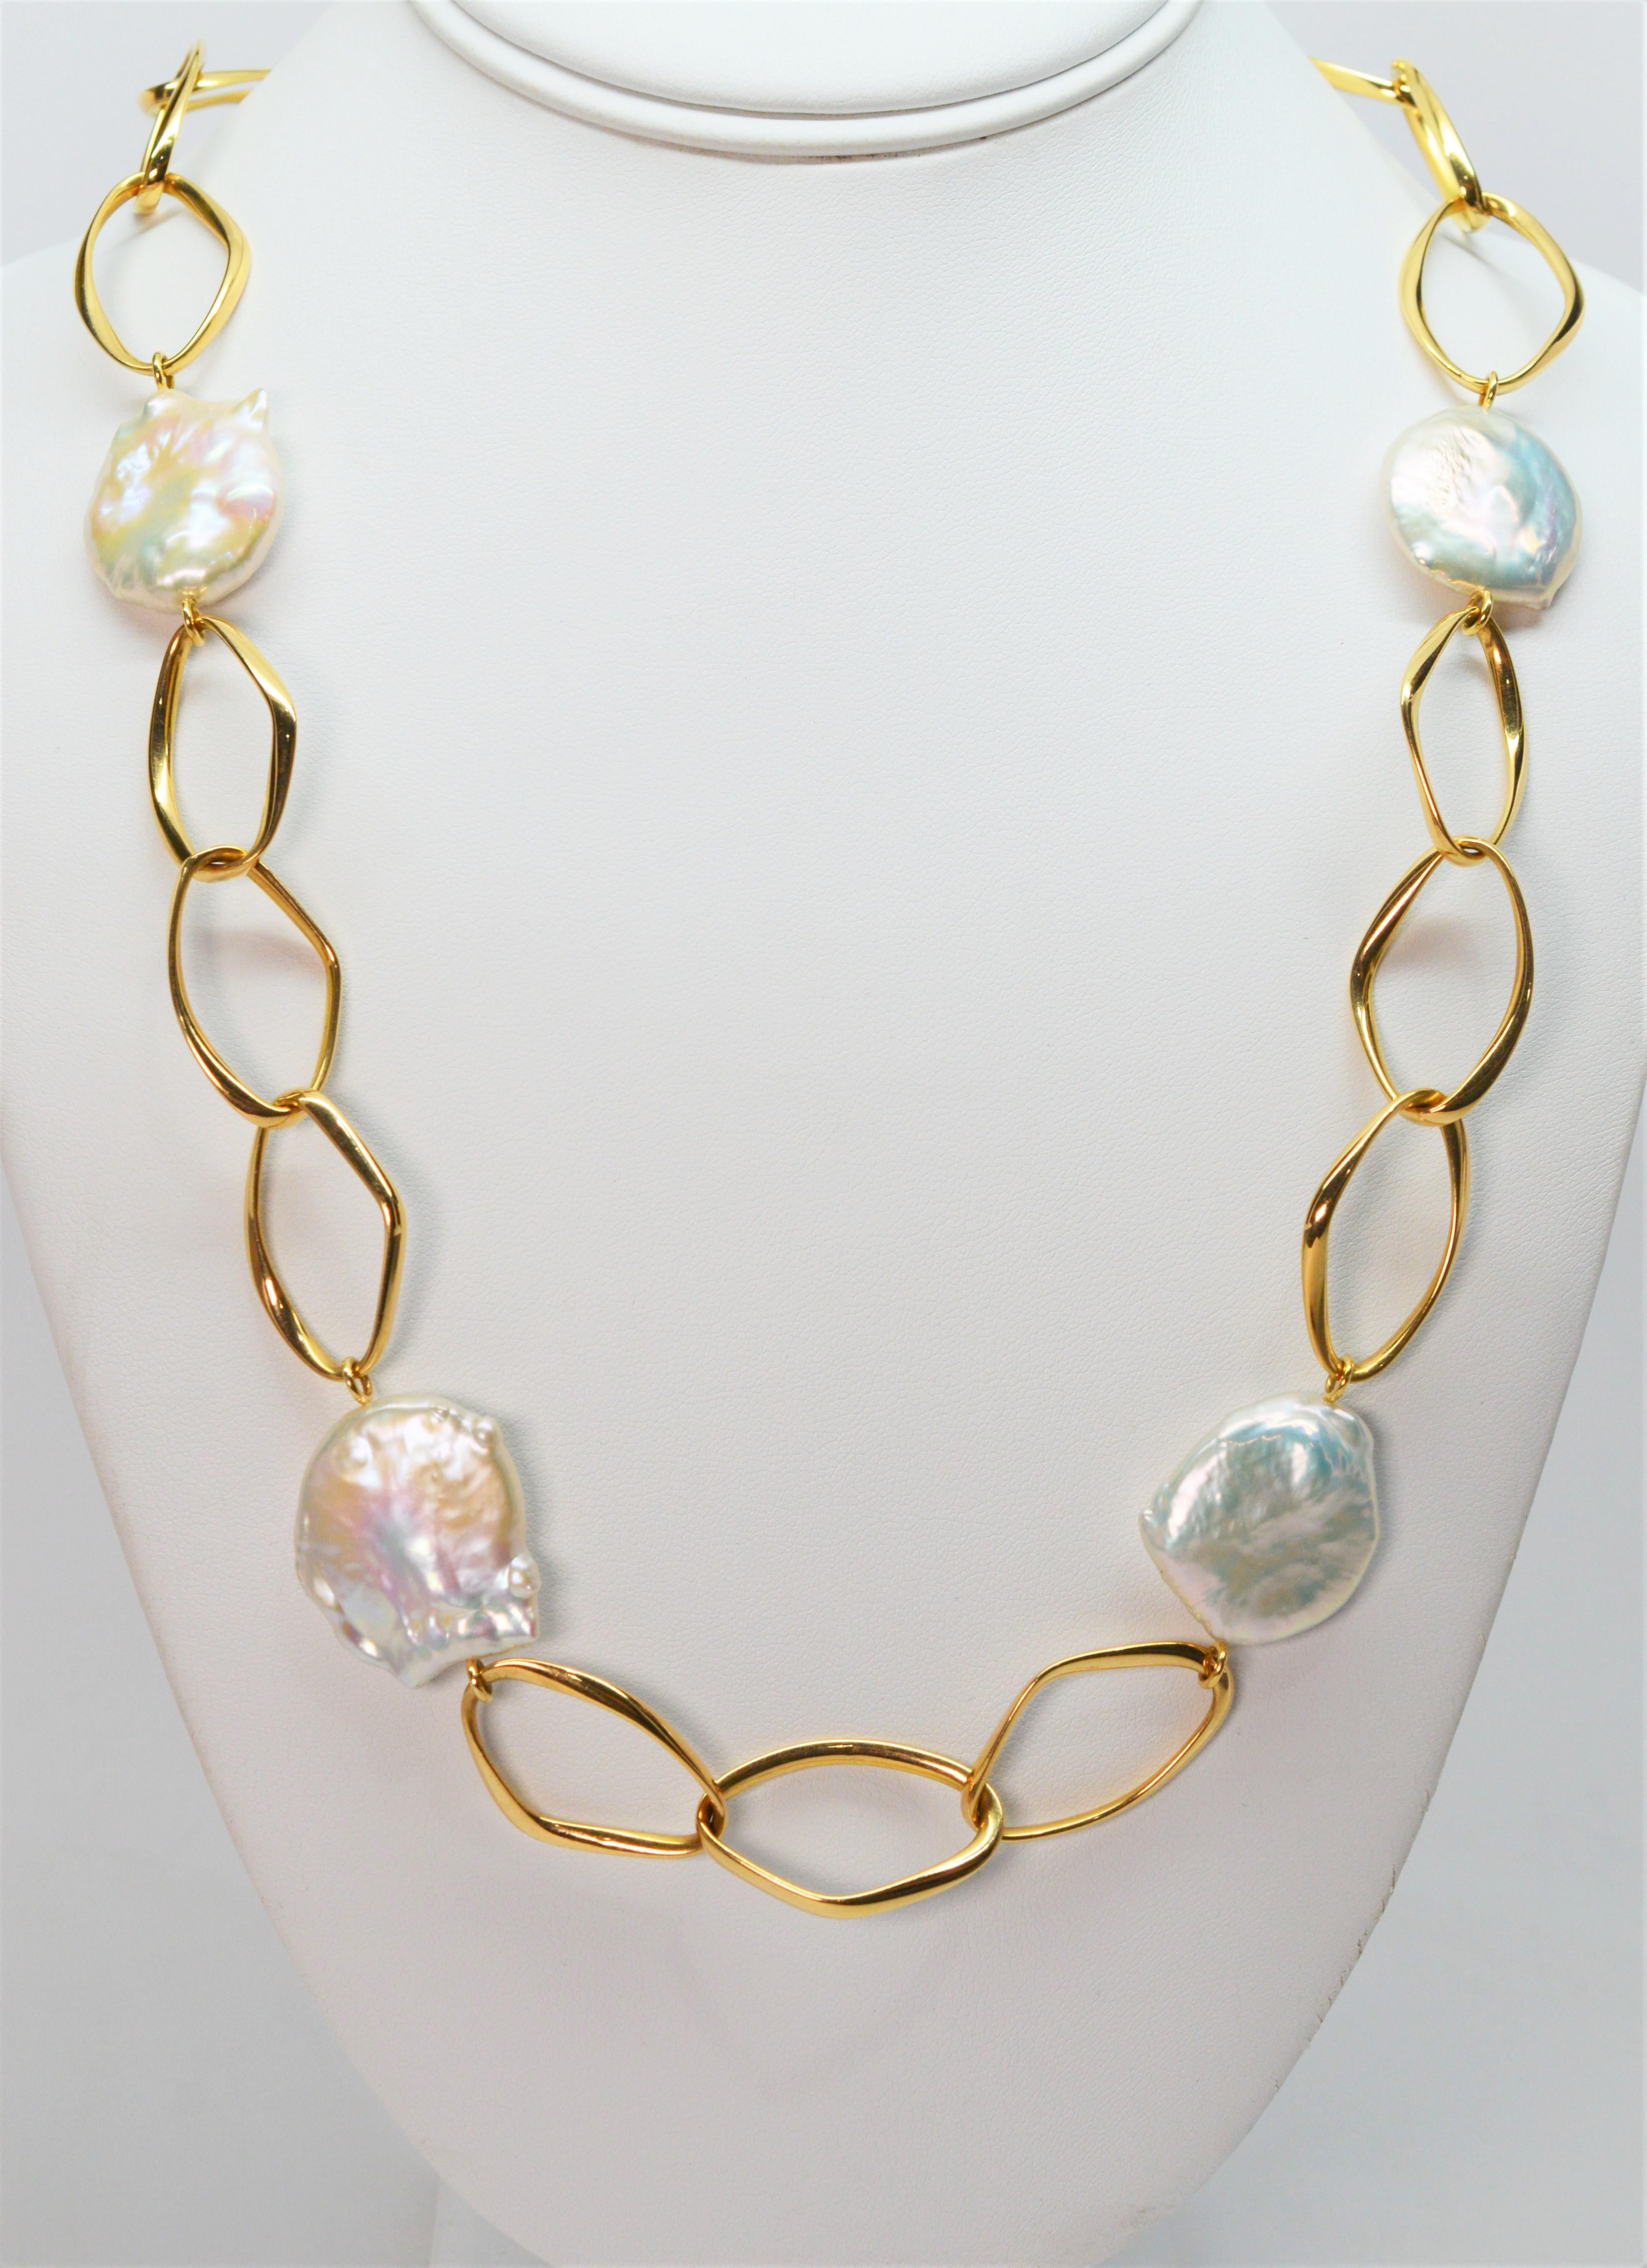 Two bold elements, equally complementary, give this bright and airy chain necklace its fresh modern look. The contemporary oval shaped 3/4 x 1 inch chain links made of highly polished eighteen karat 18k yellow gold boldly accent the five natural